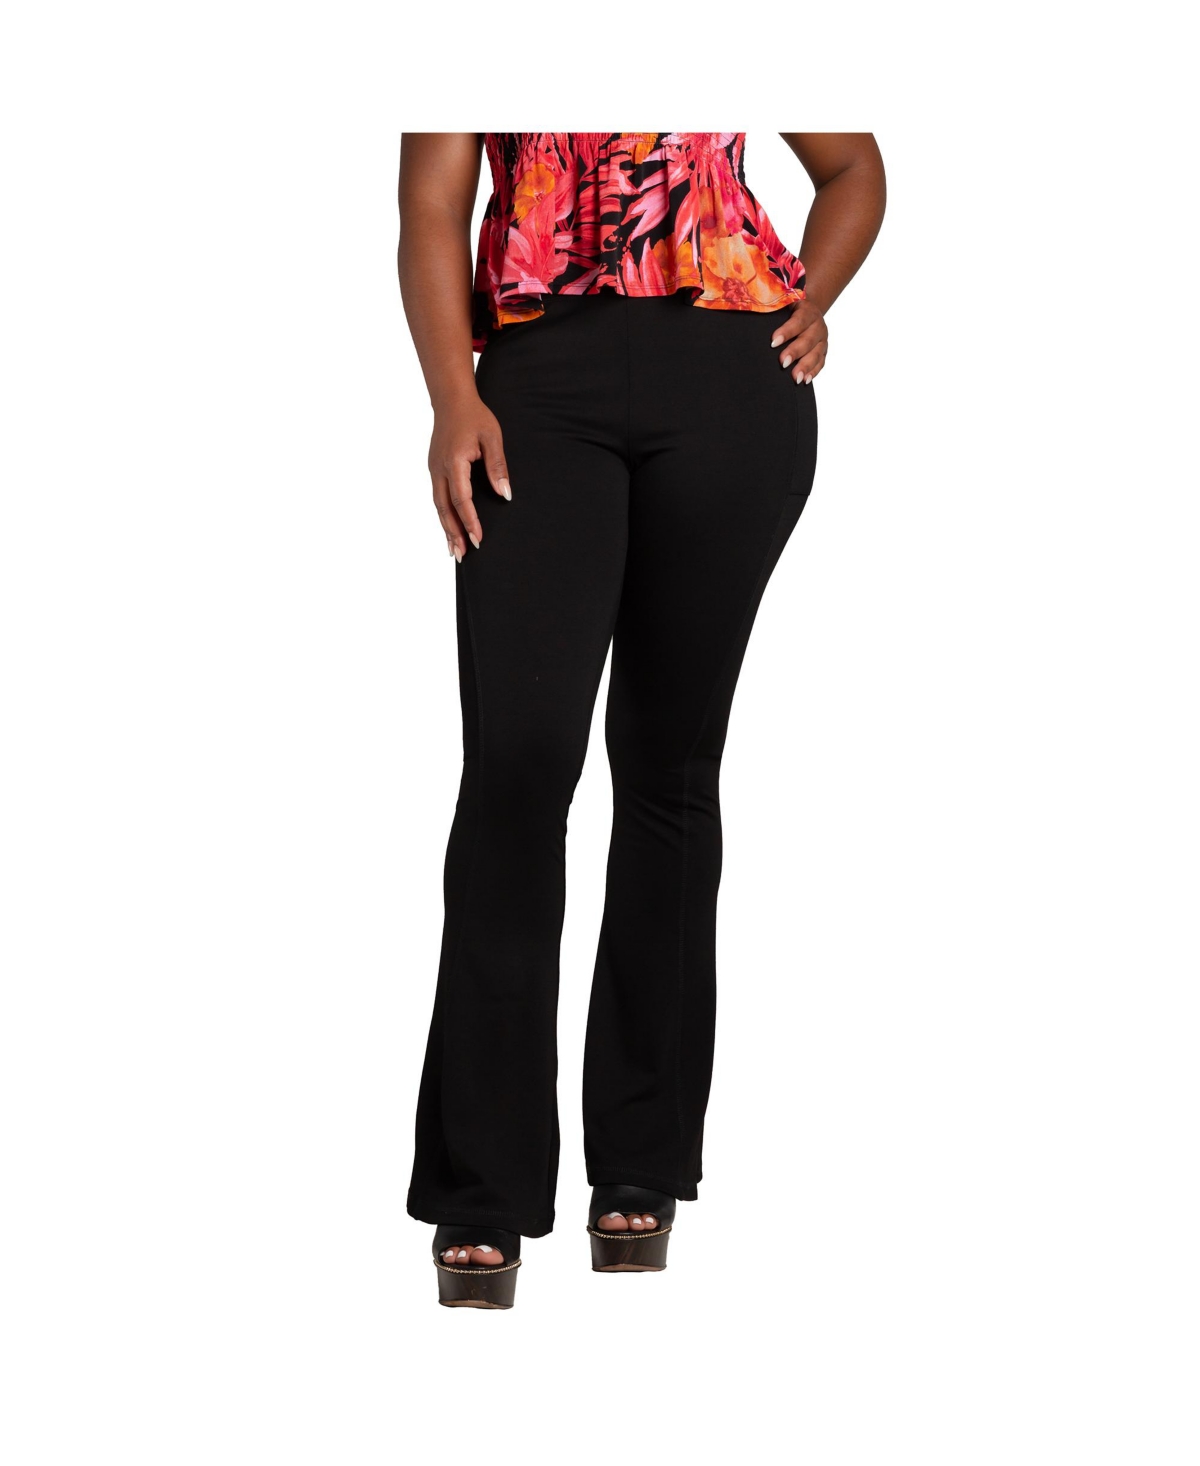 Women's Curvy Fit High Rise Fitted Flare Pant - Black